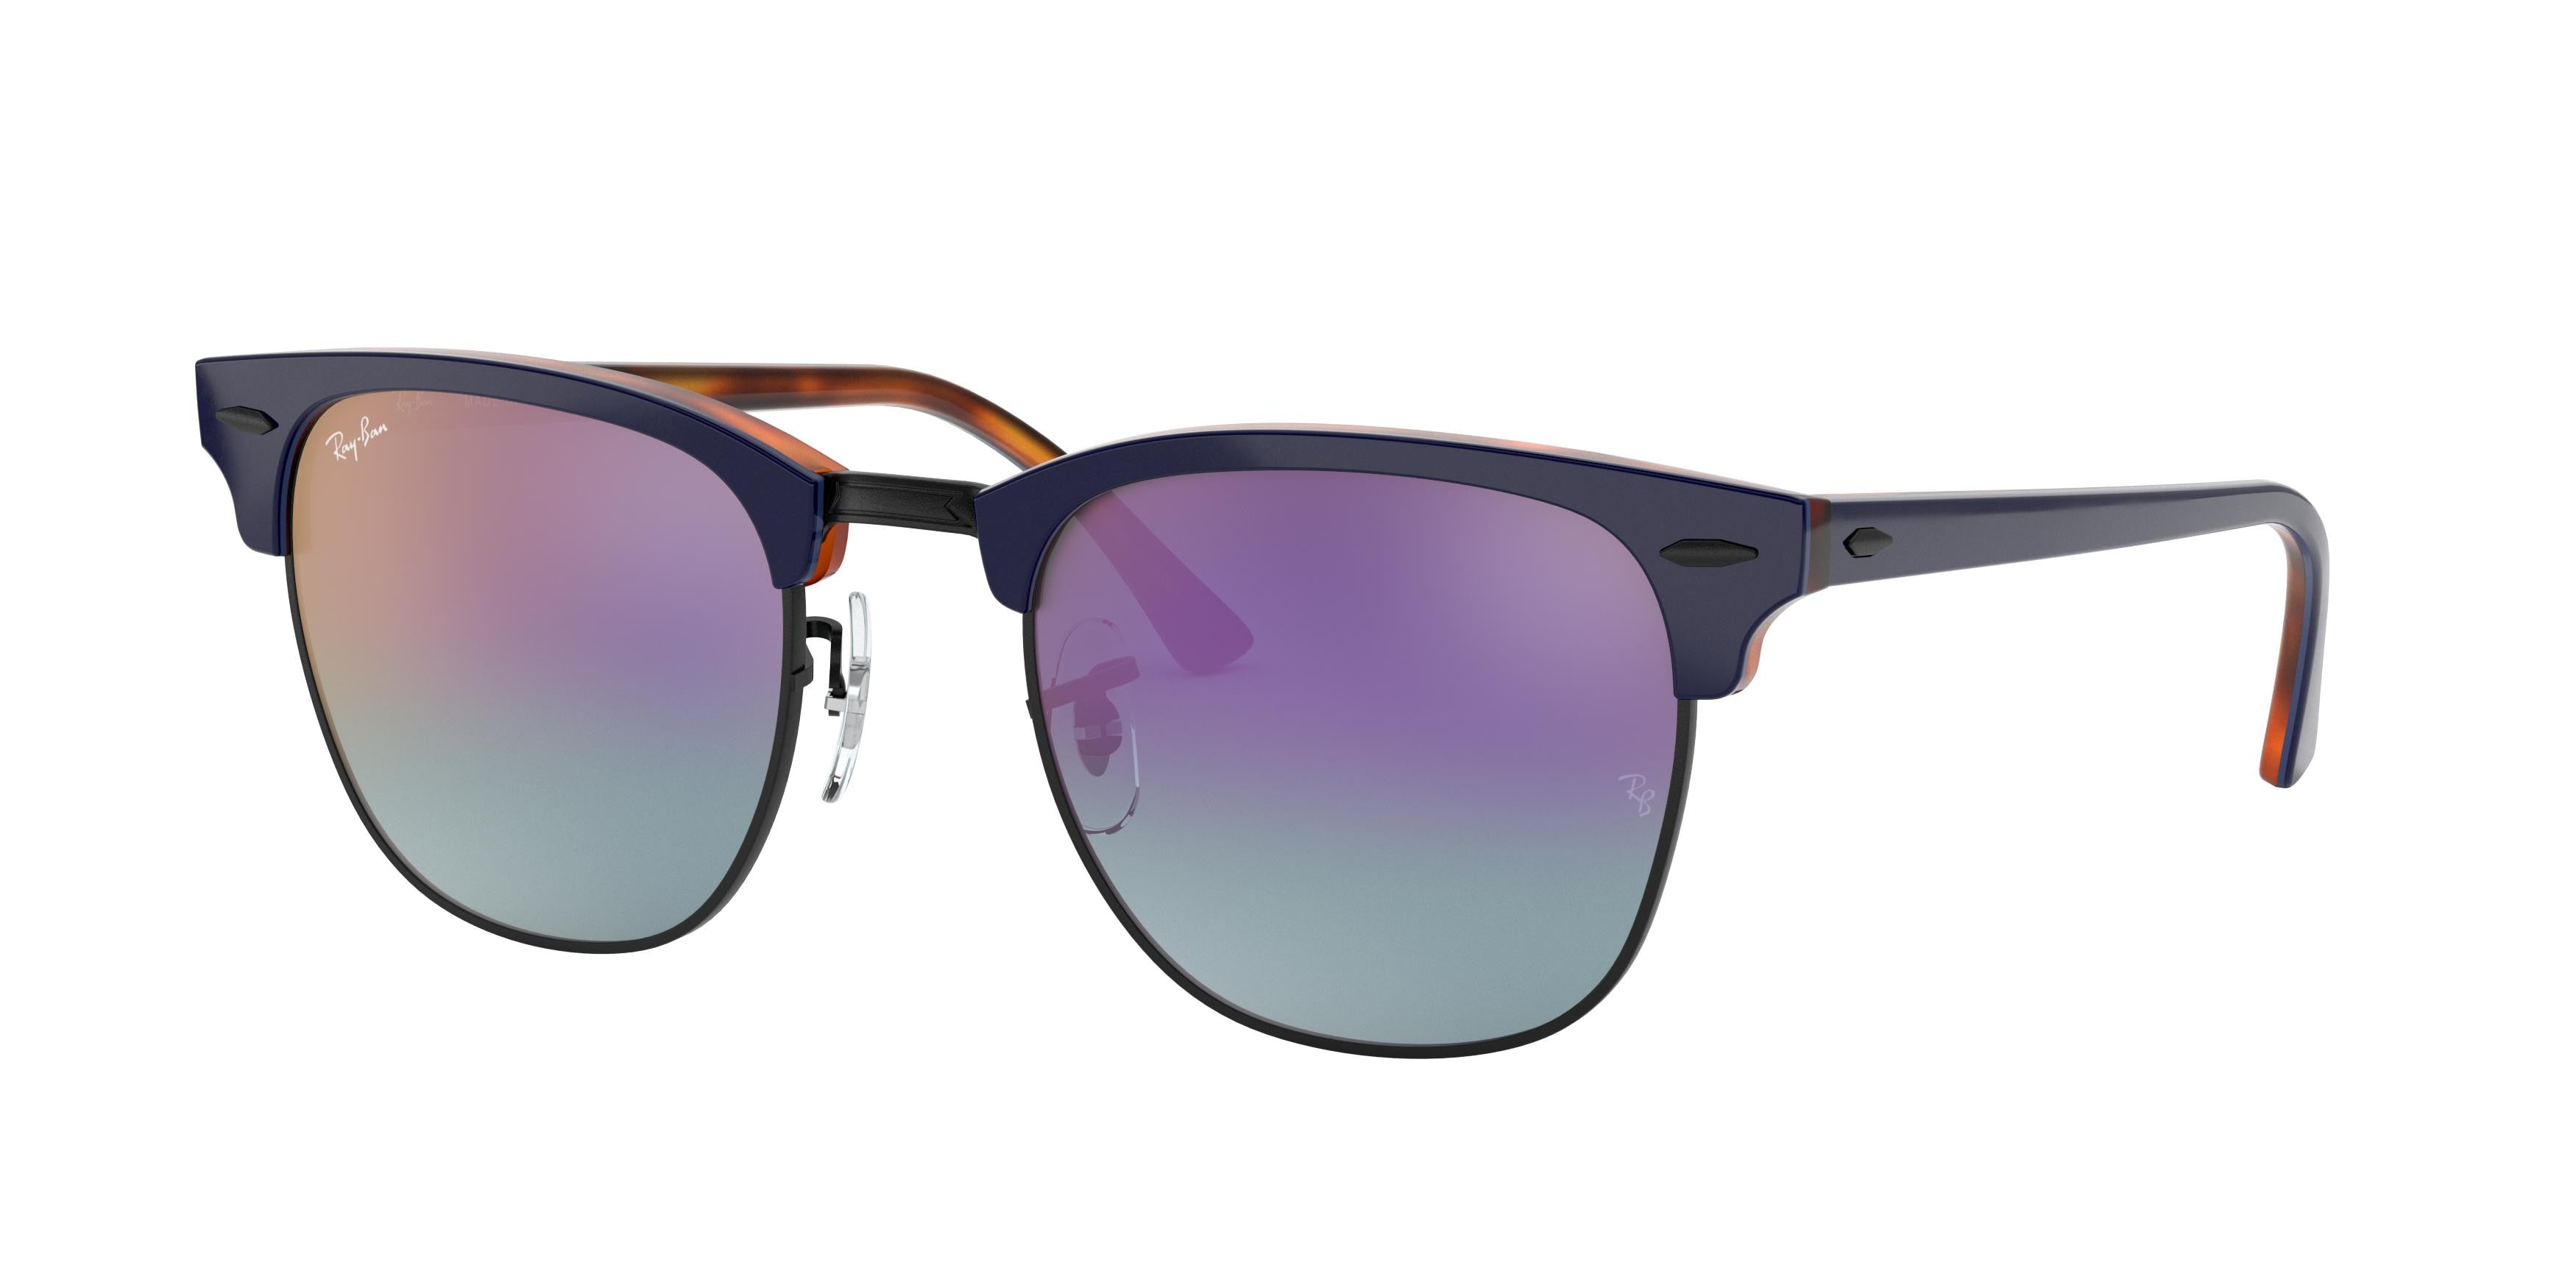 Ray-Ban CLUBMASTER RB3016 Square Sunglasses